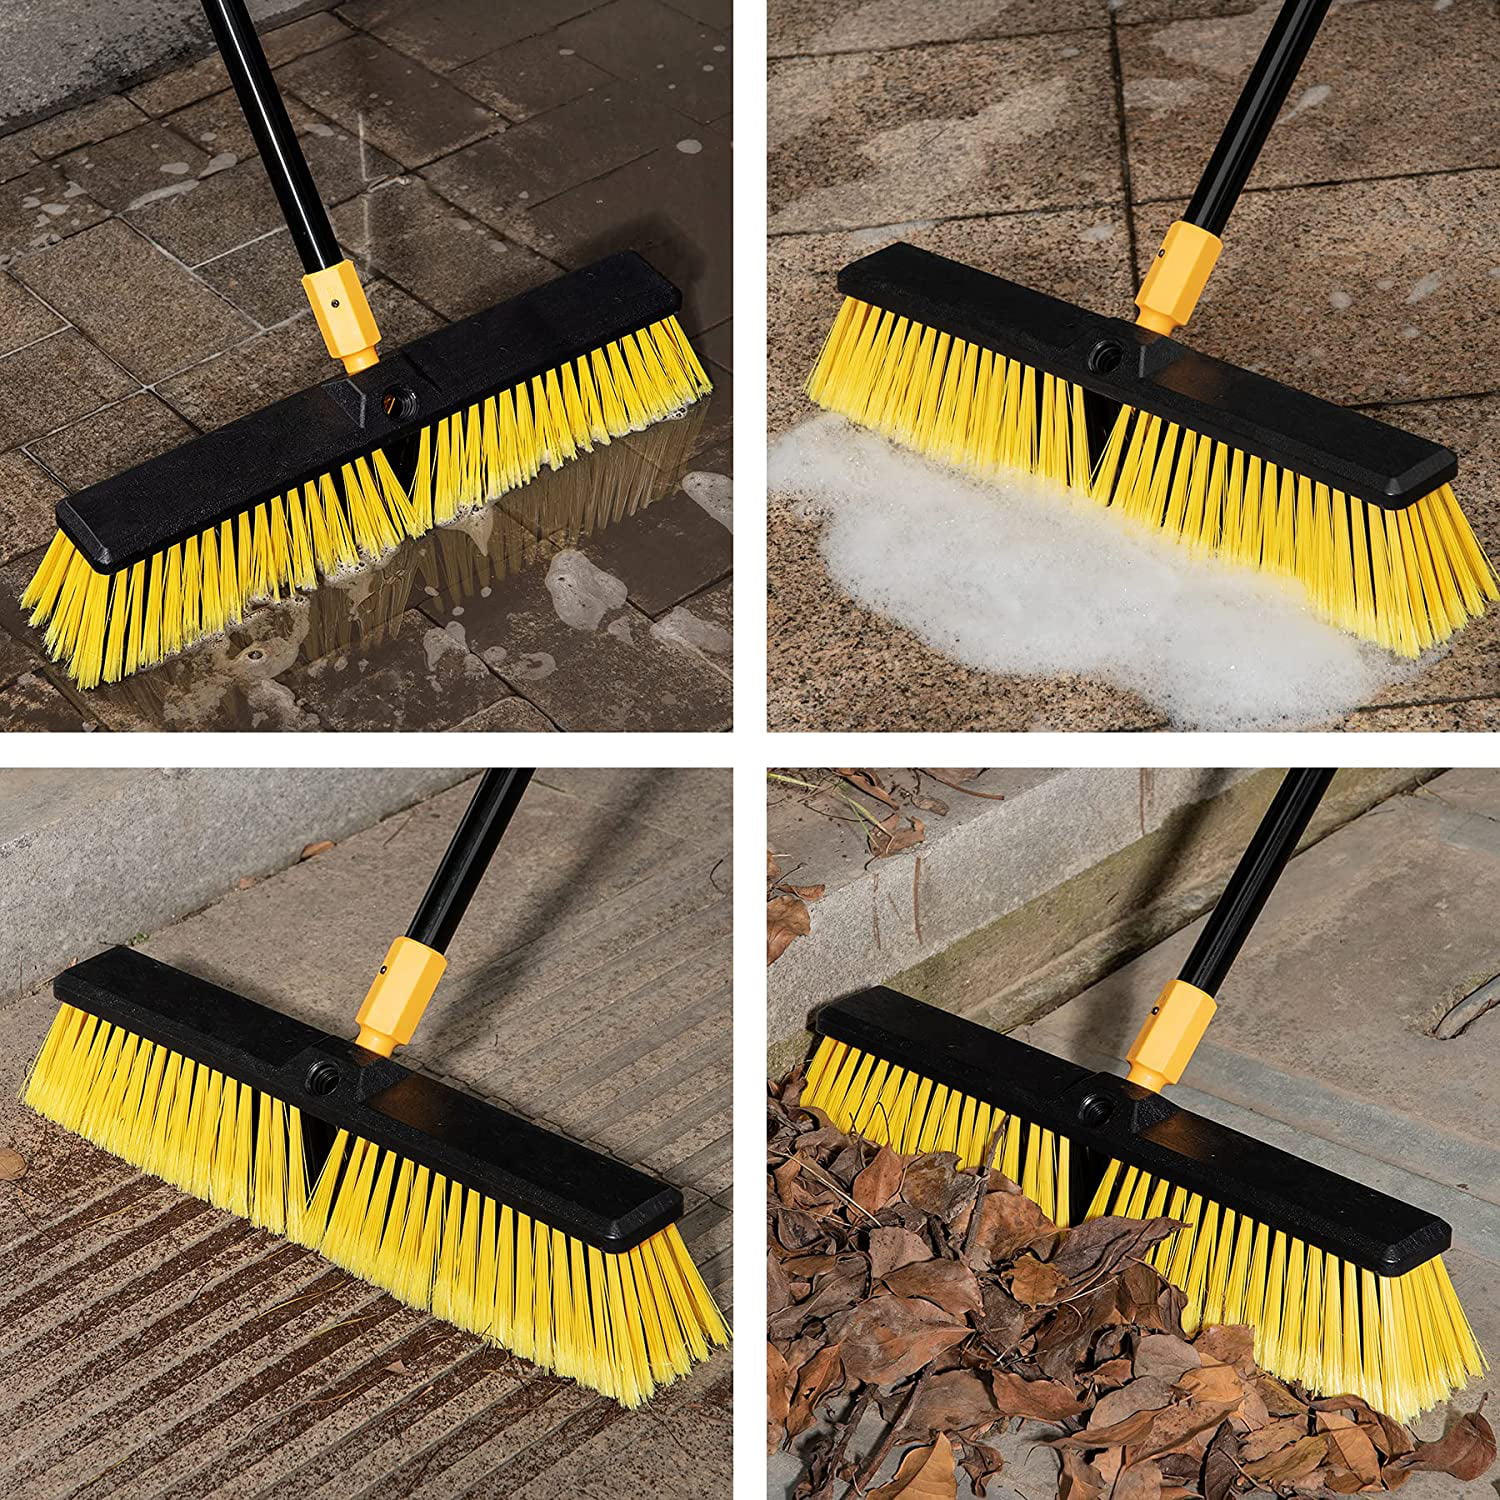 Yocada Push Broom Brush 24 Wide 65.3 Long Handle Stiff Bristles Heavy-Duty Outdoor Commercial for Cleaning Bathroom Kitchen Patio Garage Deck Concrete Wood Stone Tile Floor